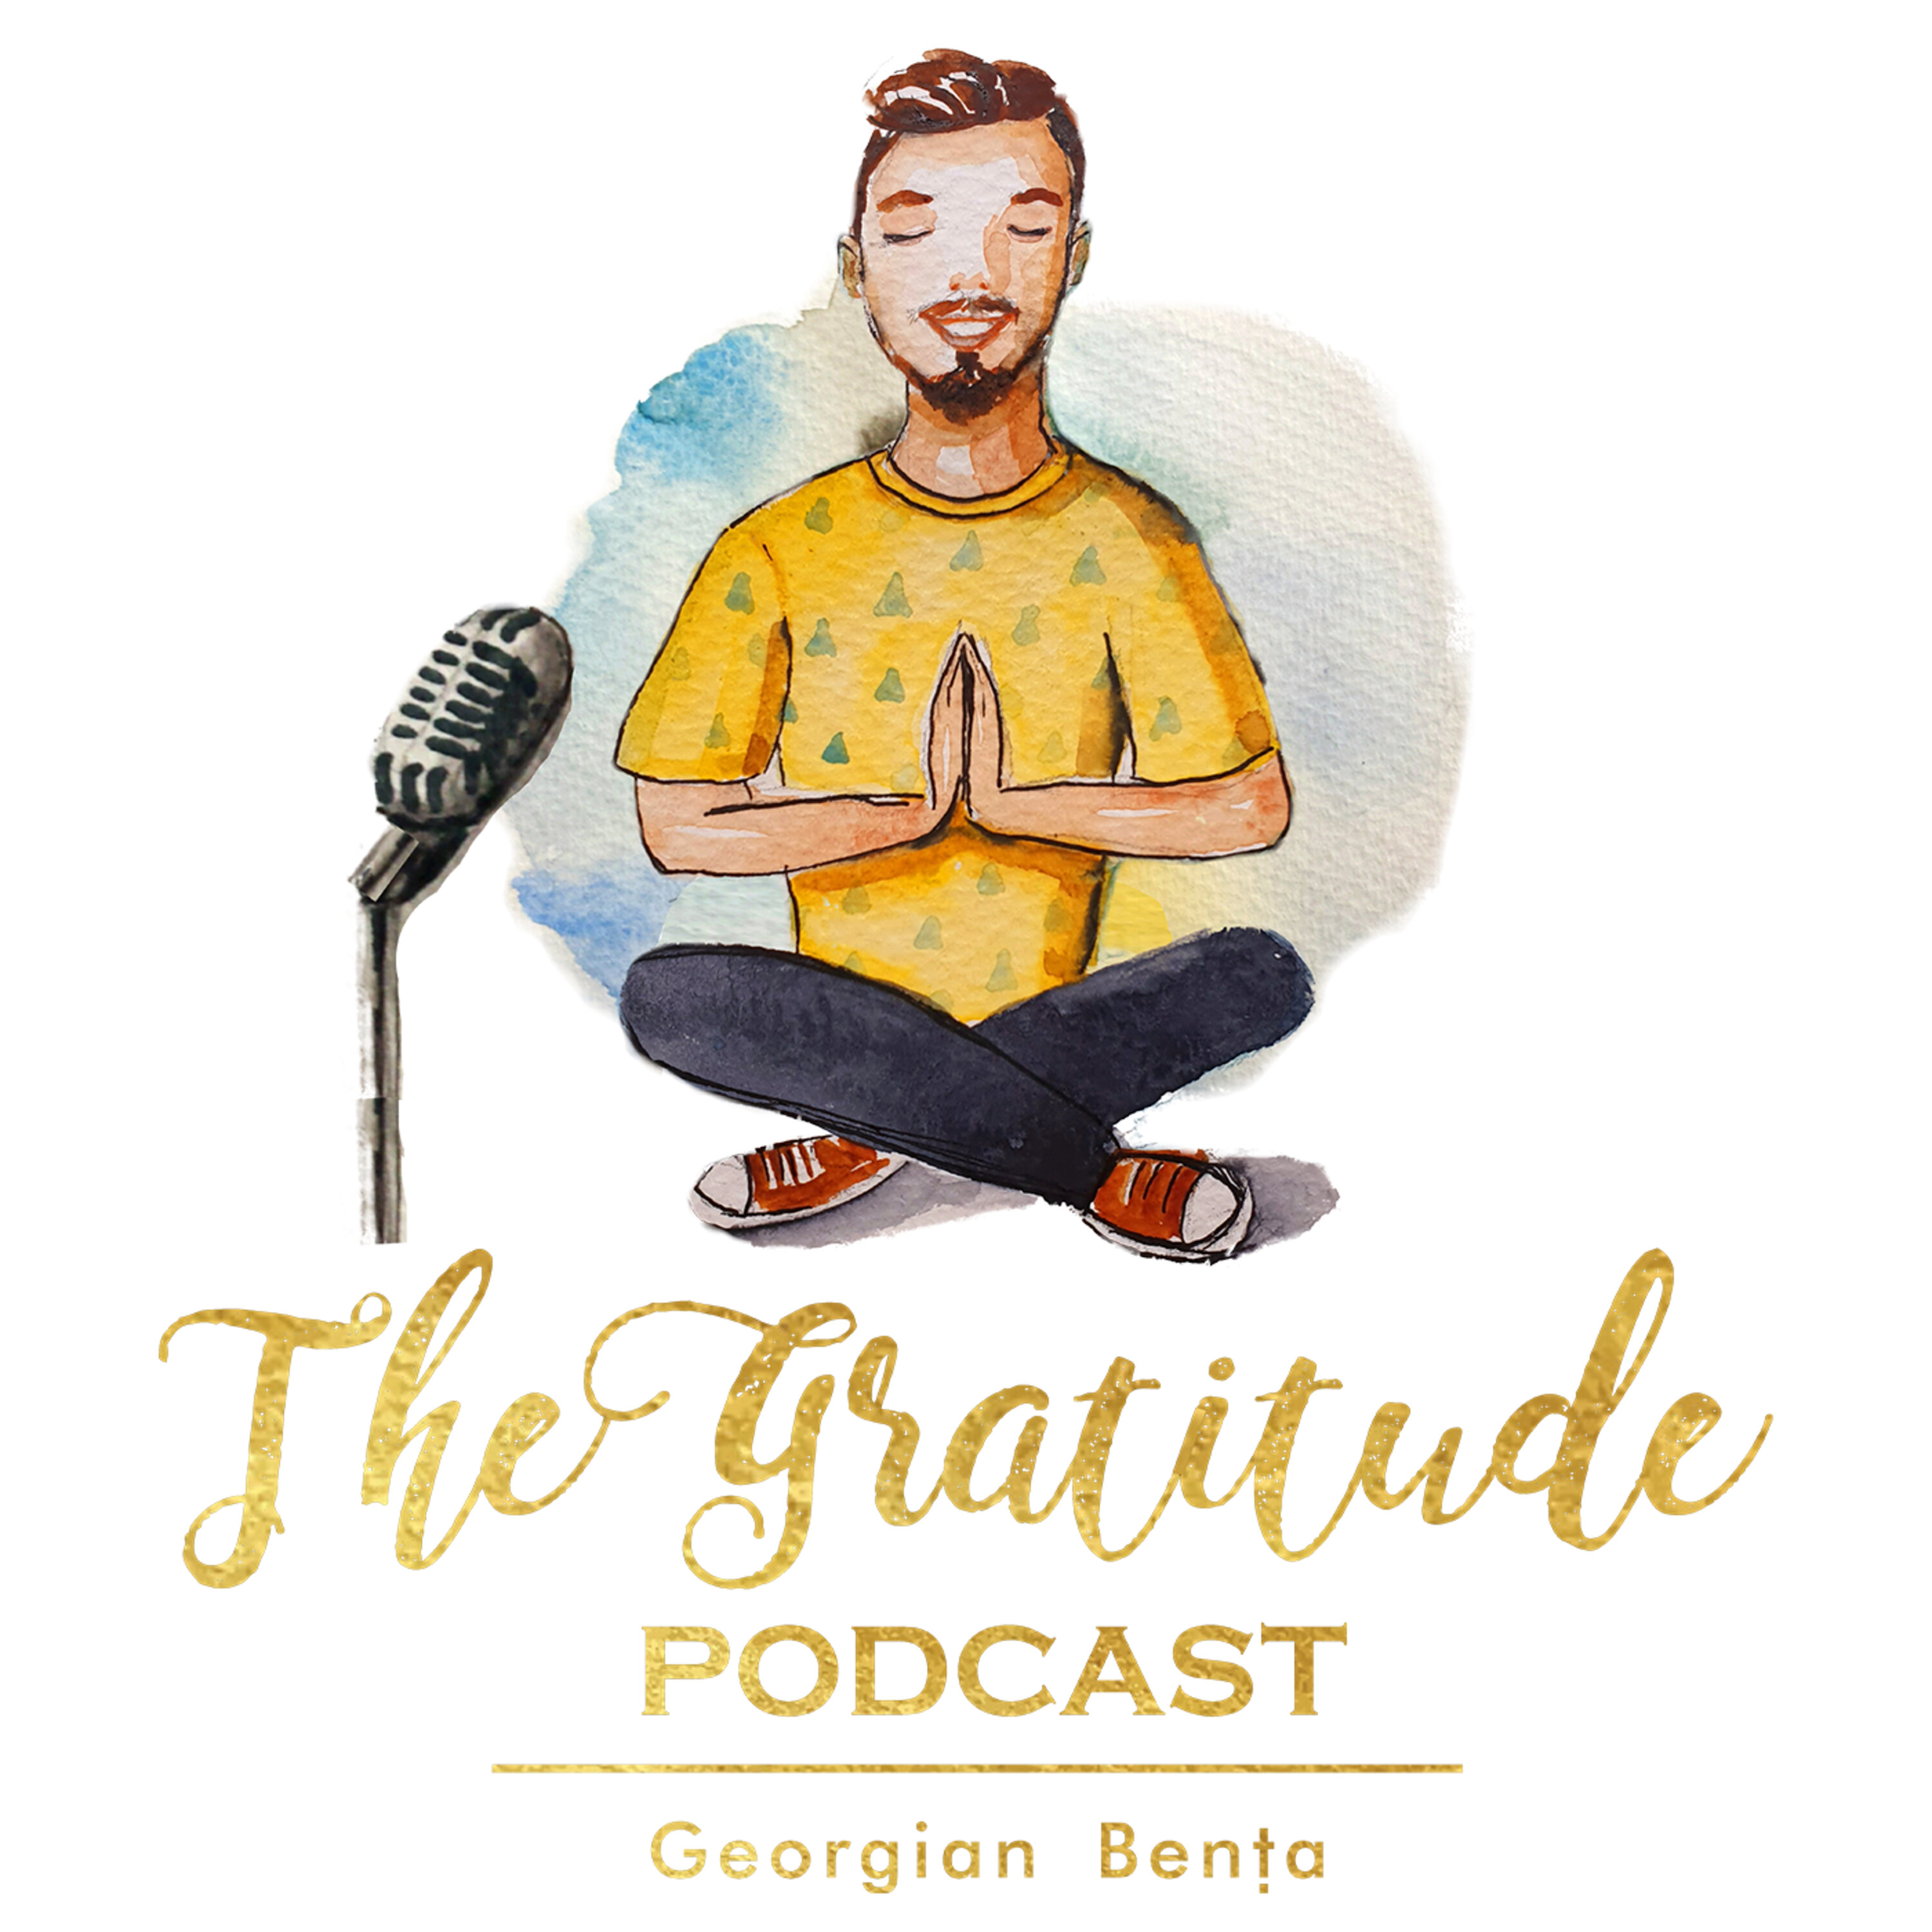 Bob Proctor on Gratitude - 3 Ideas That Can Change Your Life (ep. 677)